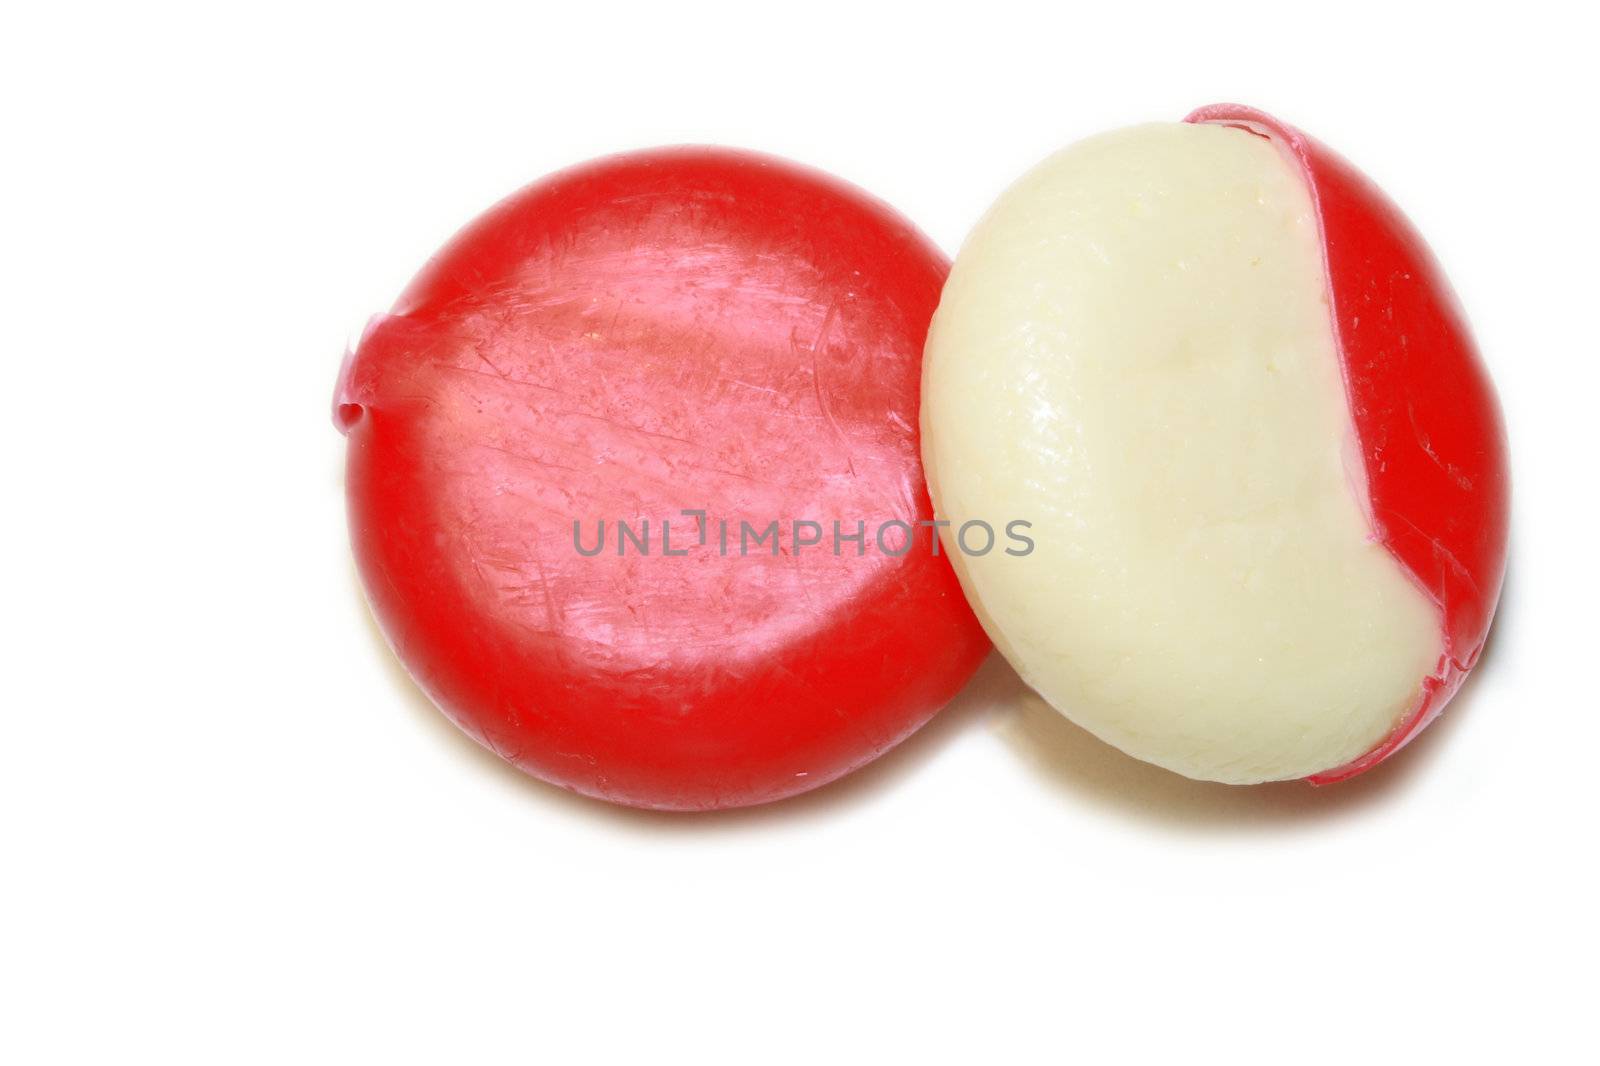 mini edam cheeses covered in red wax coating over a white background